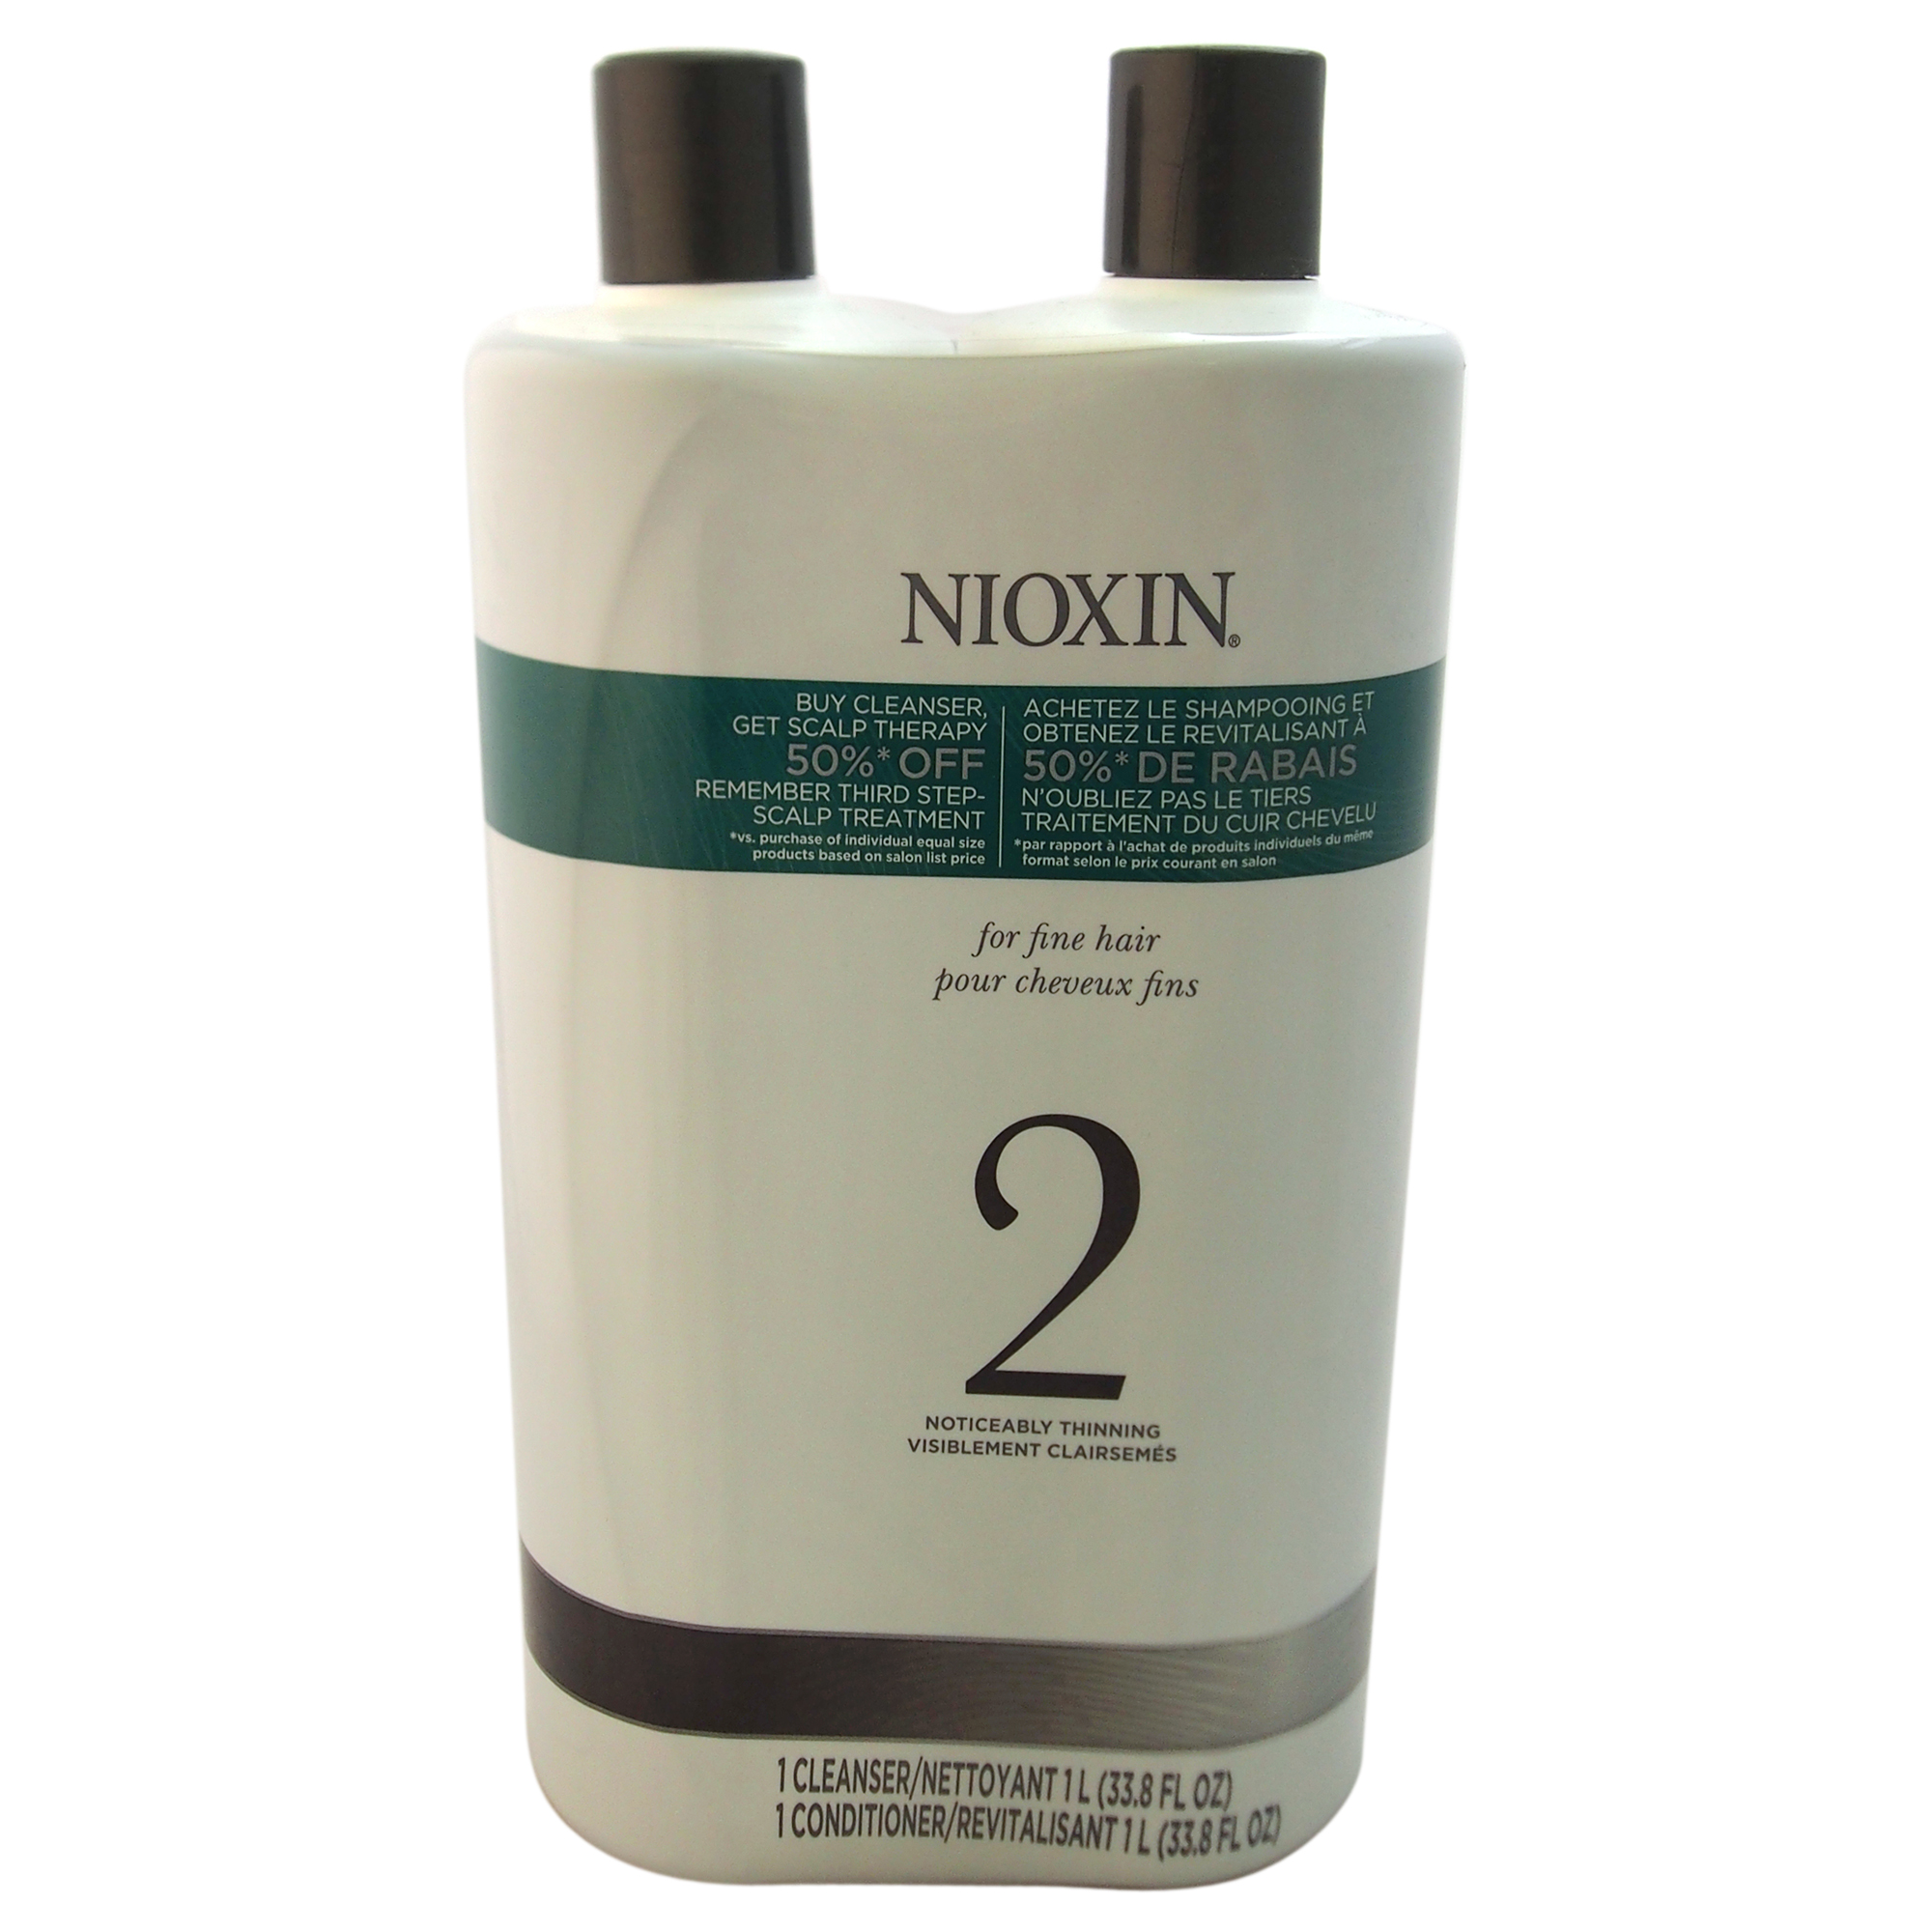 Nioxin System 2 Cleanser & Scalp Therapy Conditioner Duo